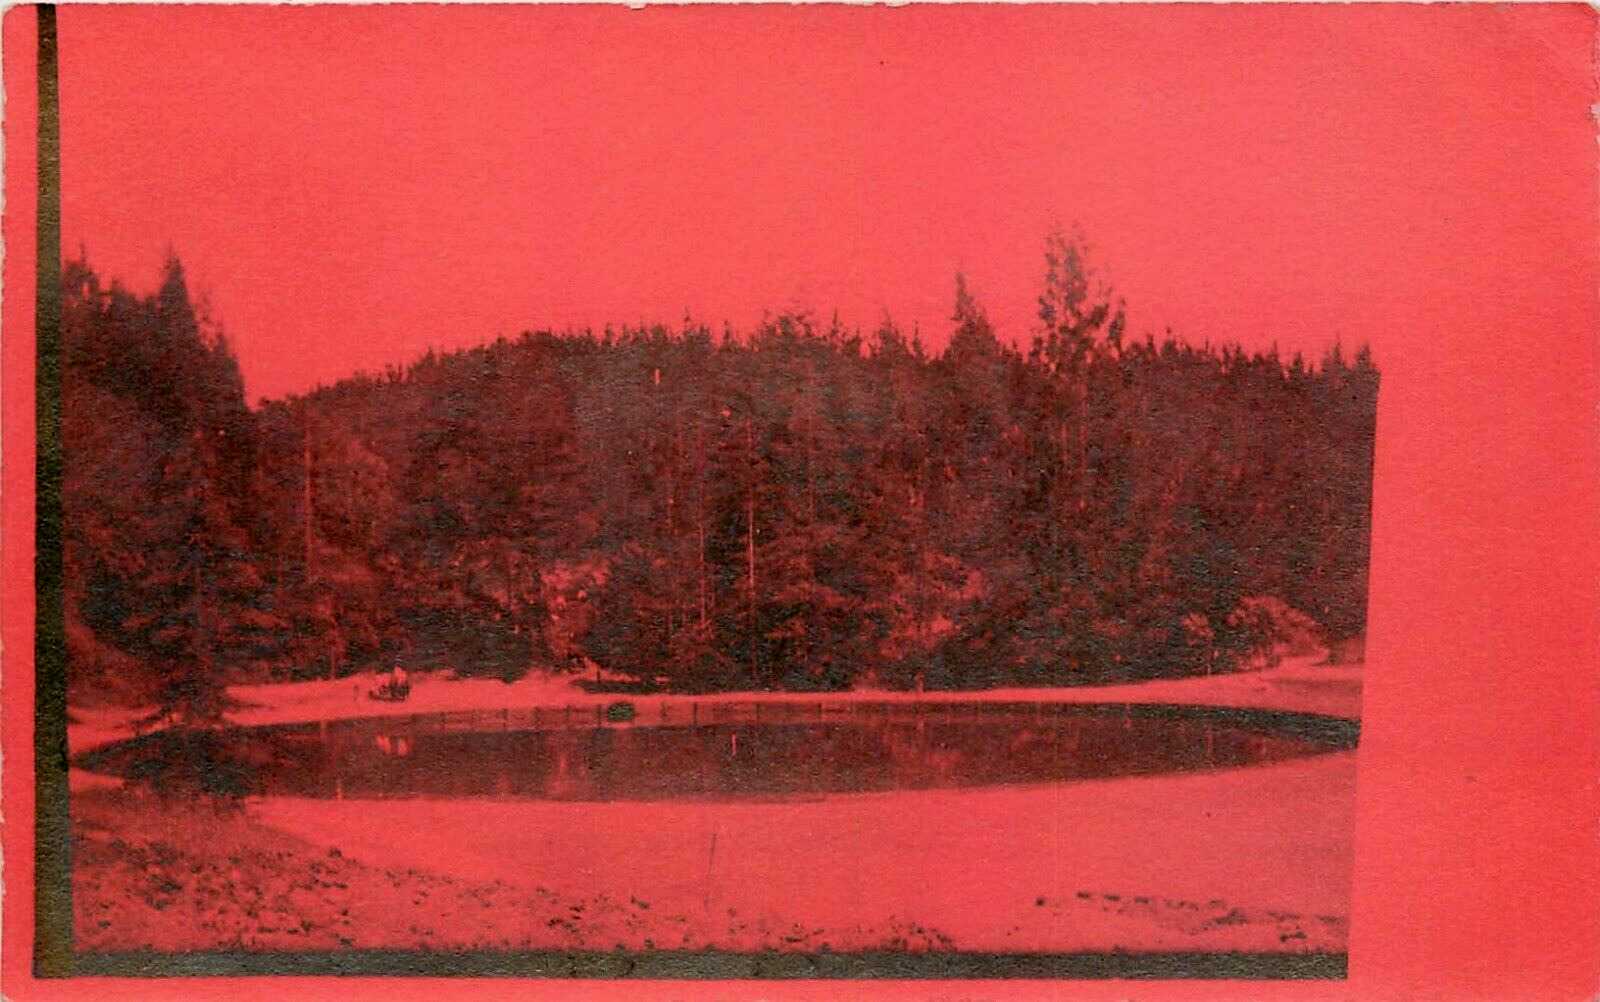 c1910 RPPC Postcard on Red Paper, Mountain Reservoir, Unknown US, Prob. OR or CA